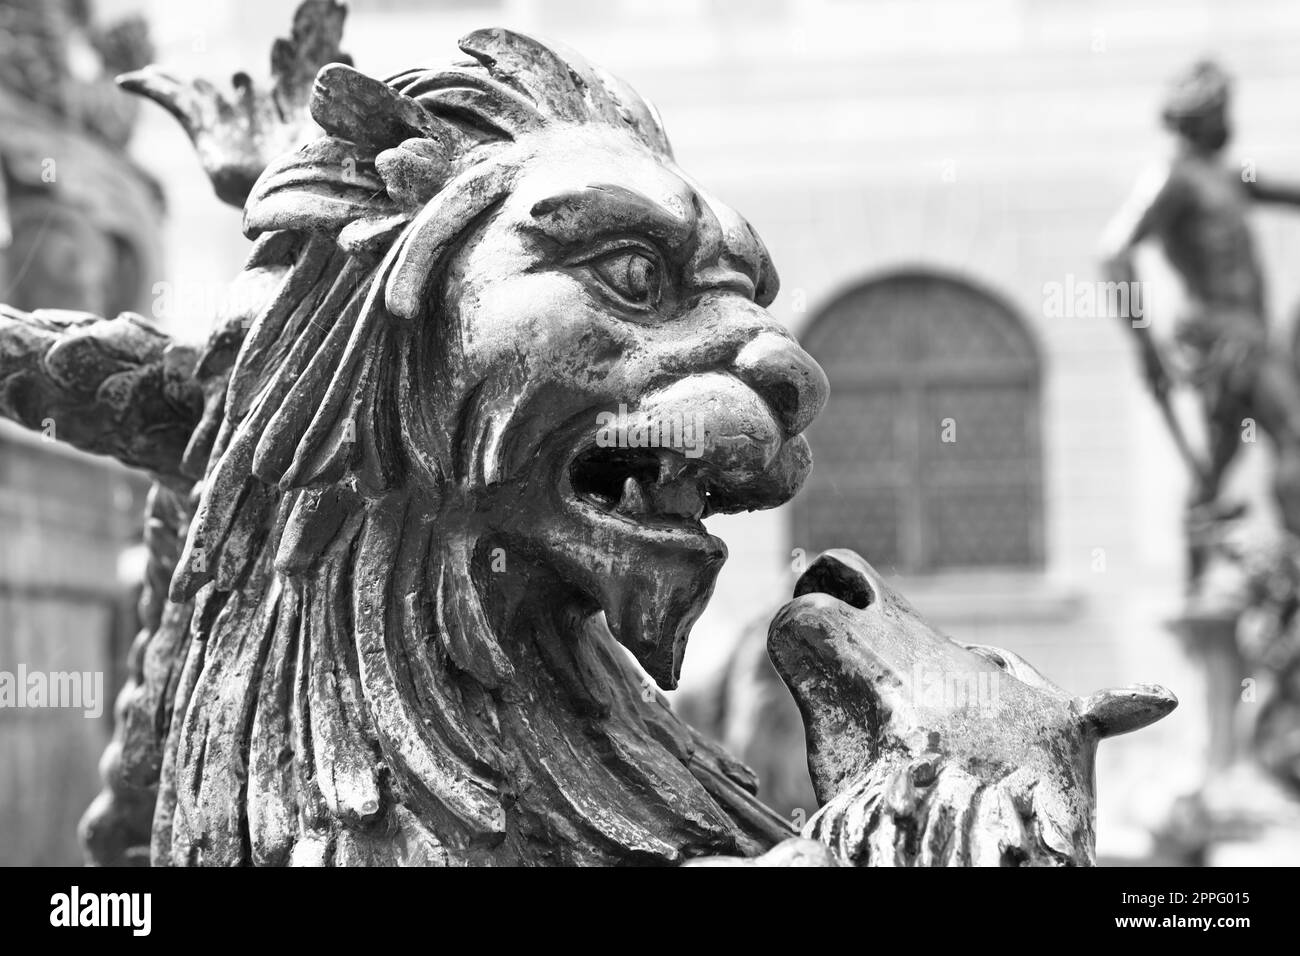 Black and white photo - mythical animal at the Wittelsbach fountain residence in Munich Stock Photo